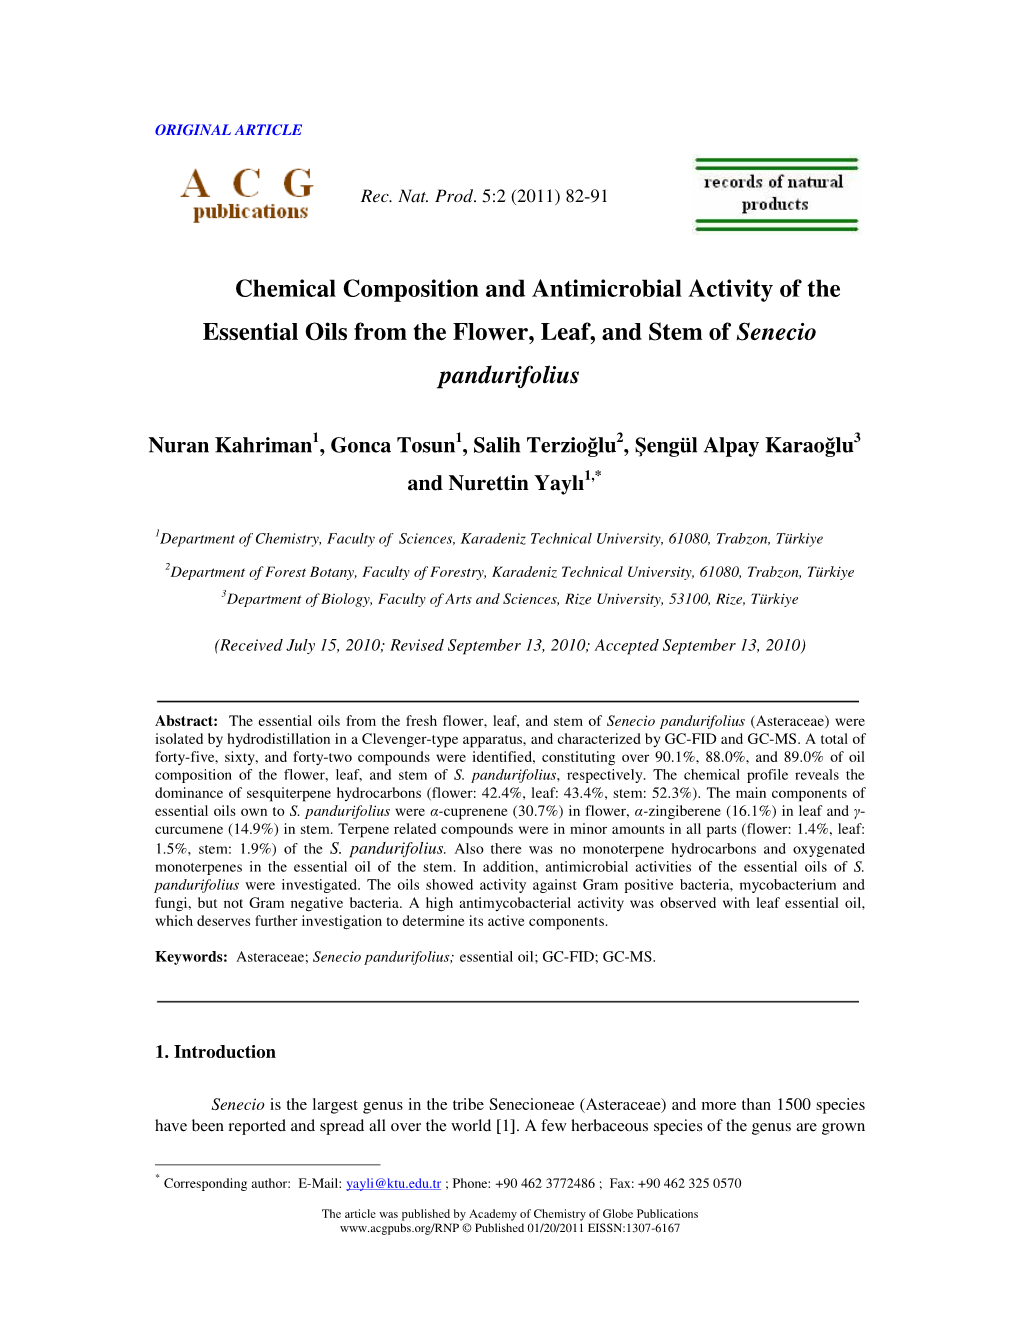 Chemical Composition and Antimicrobial Activity of the Essential Oils from the Flower, Leaf, and Stem of Senecio Pandurifolius